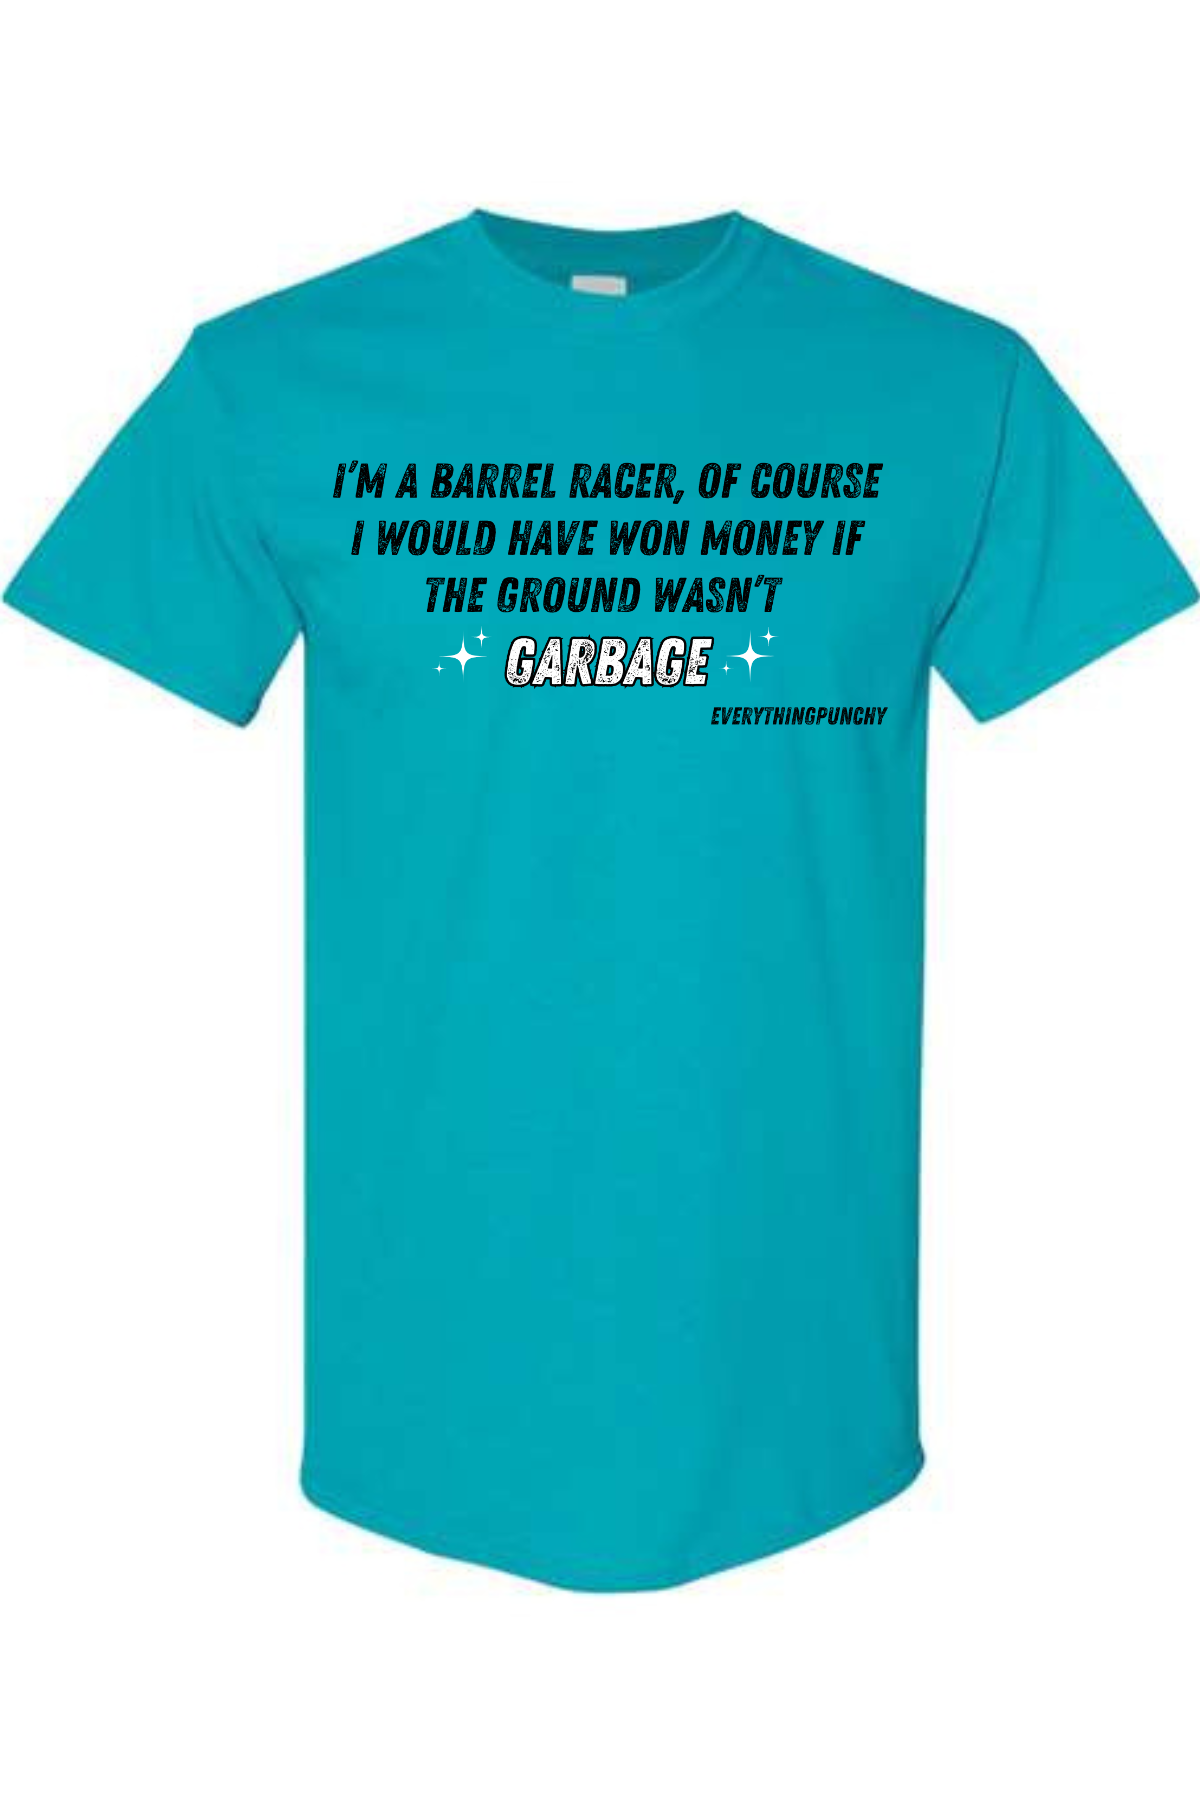 I'm a barrel racer, of course I would have won money if the ground wasn't garbage t-shirt